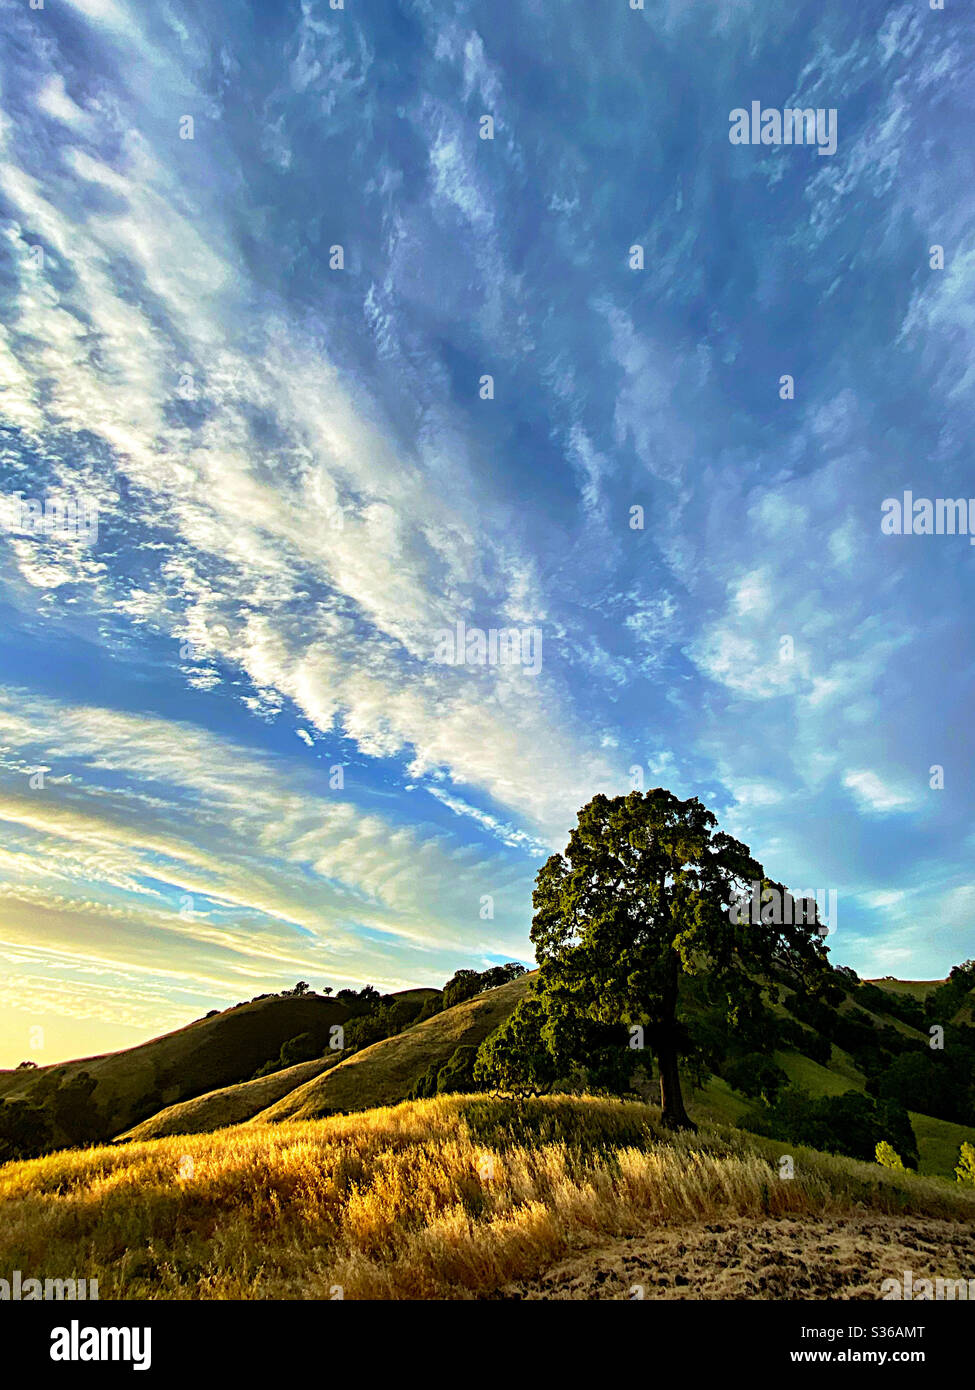 Foothills landscape, with oak tree and clouds Stock Photo